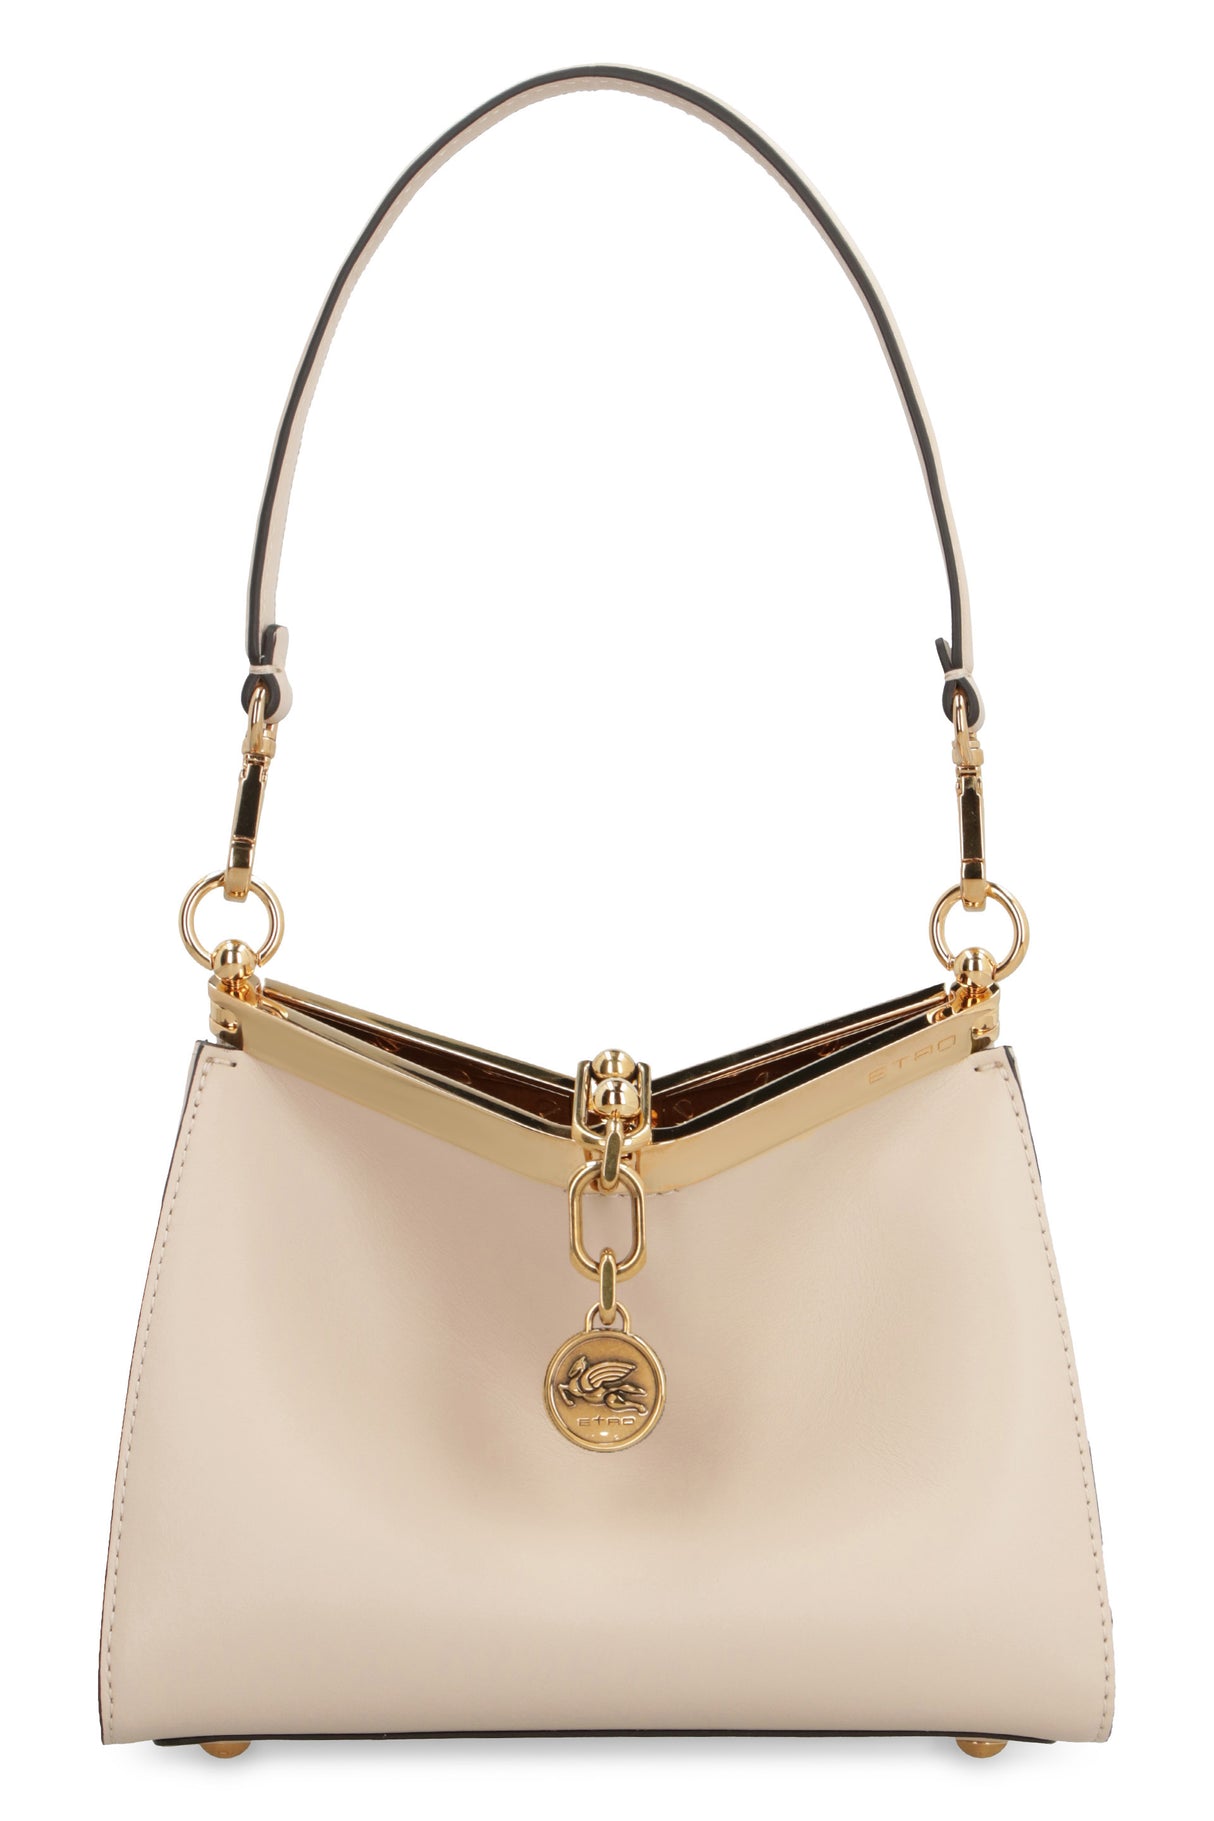 ETRO Chic Pale Pink Mini Leather Shoulder Bag with Gold-Tone Accents